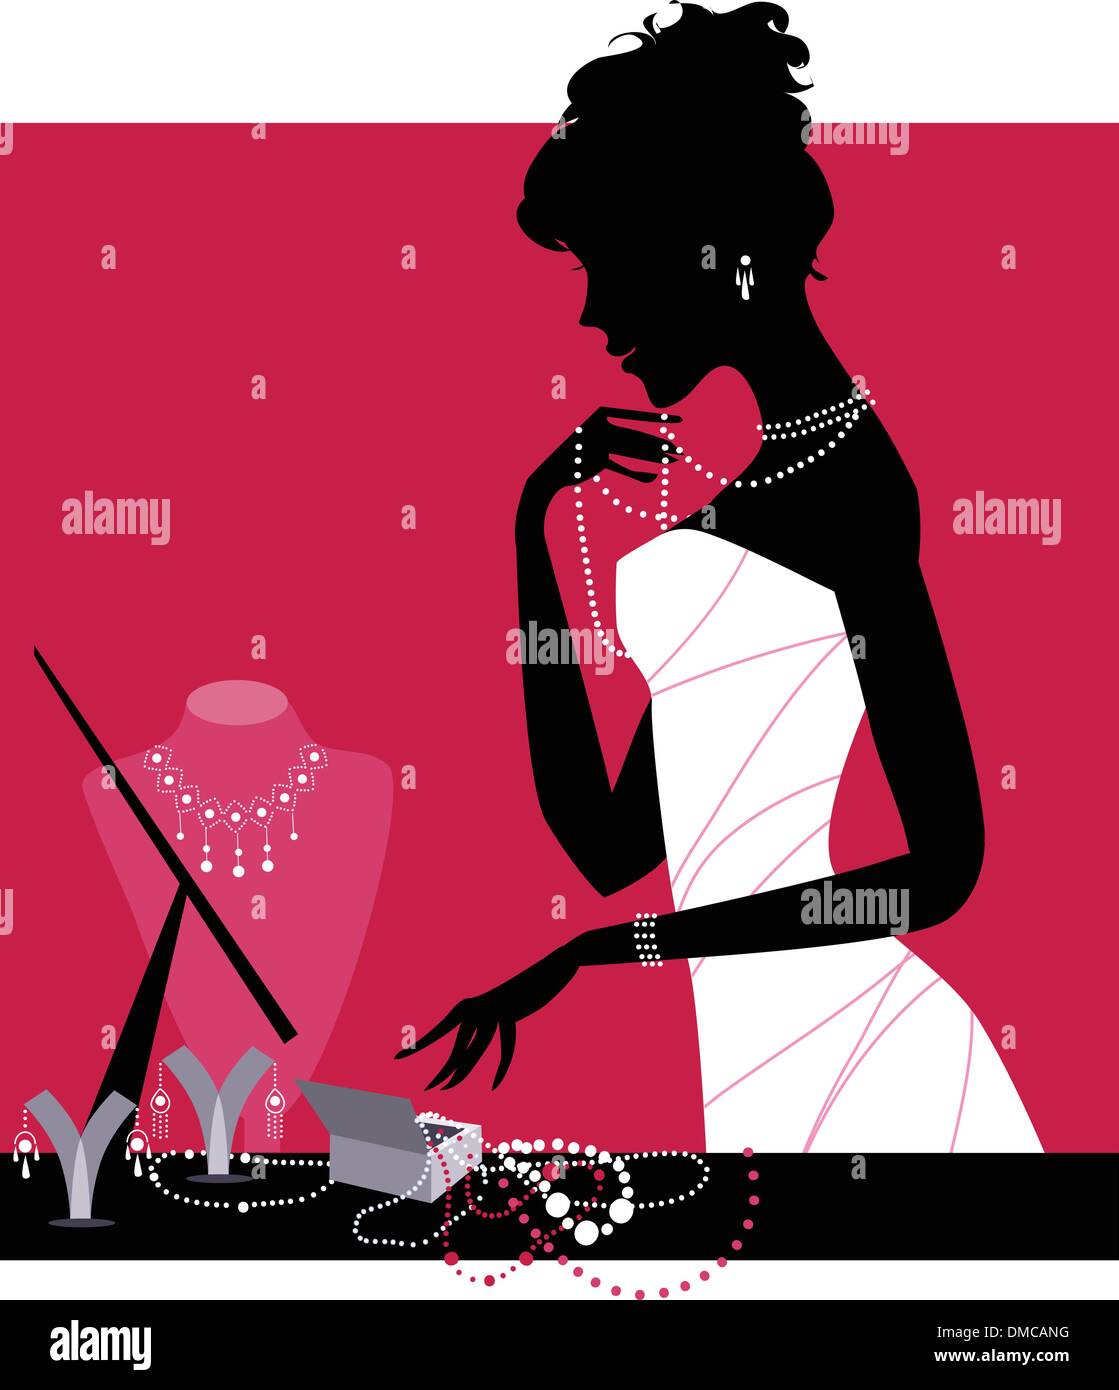 Lady wearing accessories Stock Vector